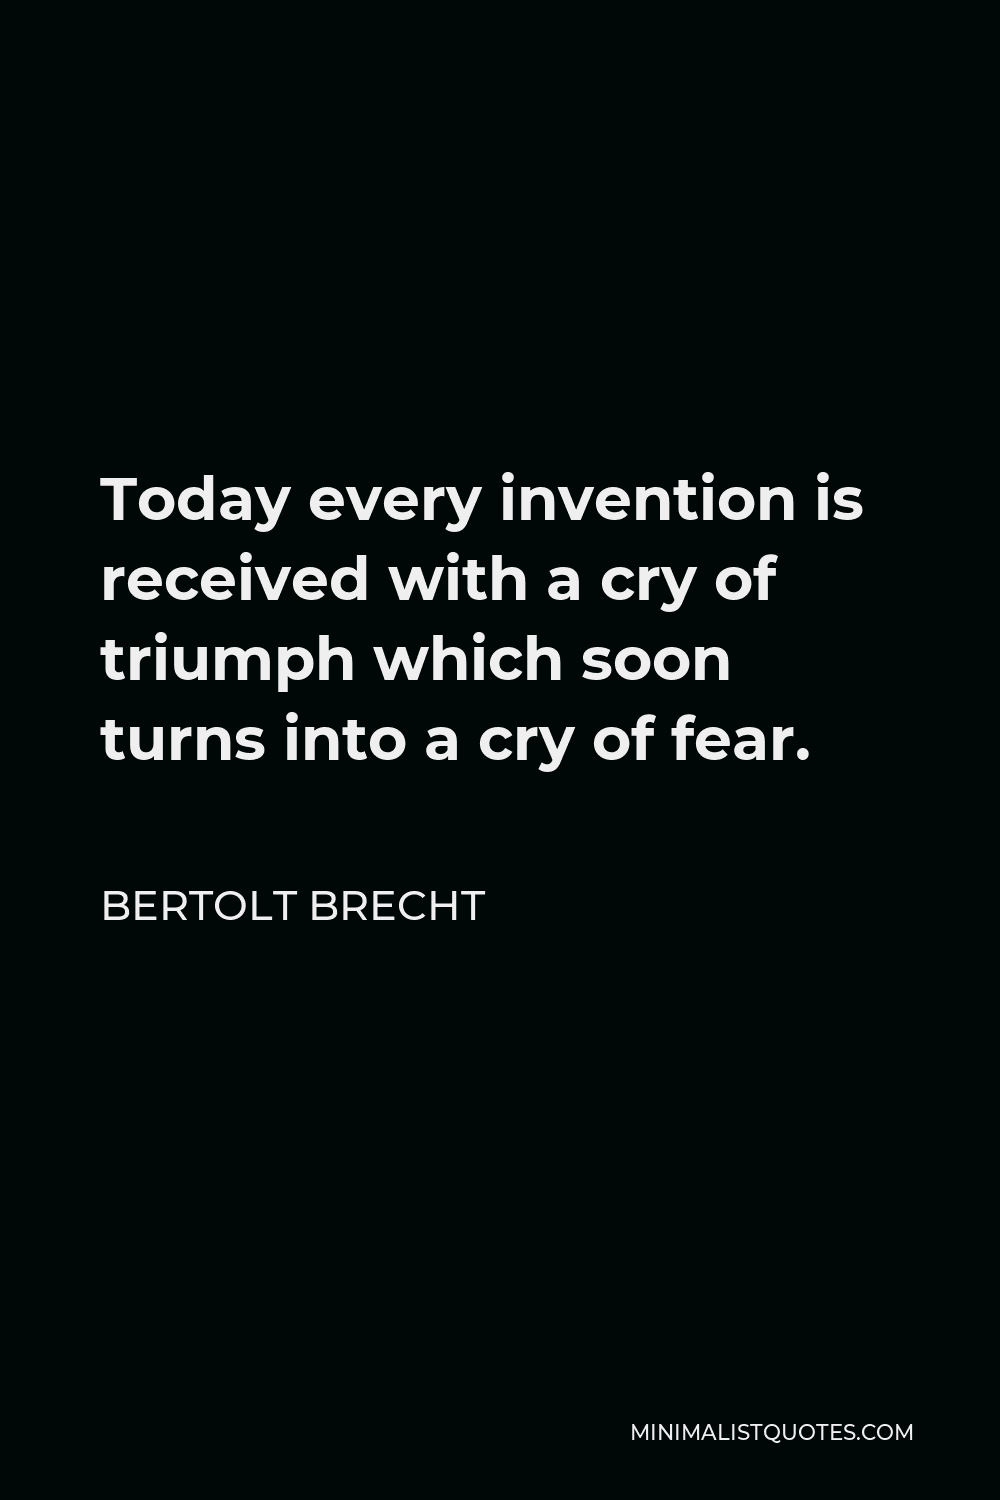 Bertolt Brecht Quote - Today every invention is received with a cry of triumph which soon turns into a cry of fear.